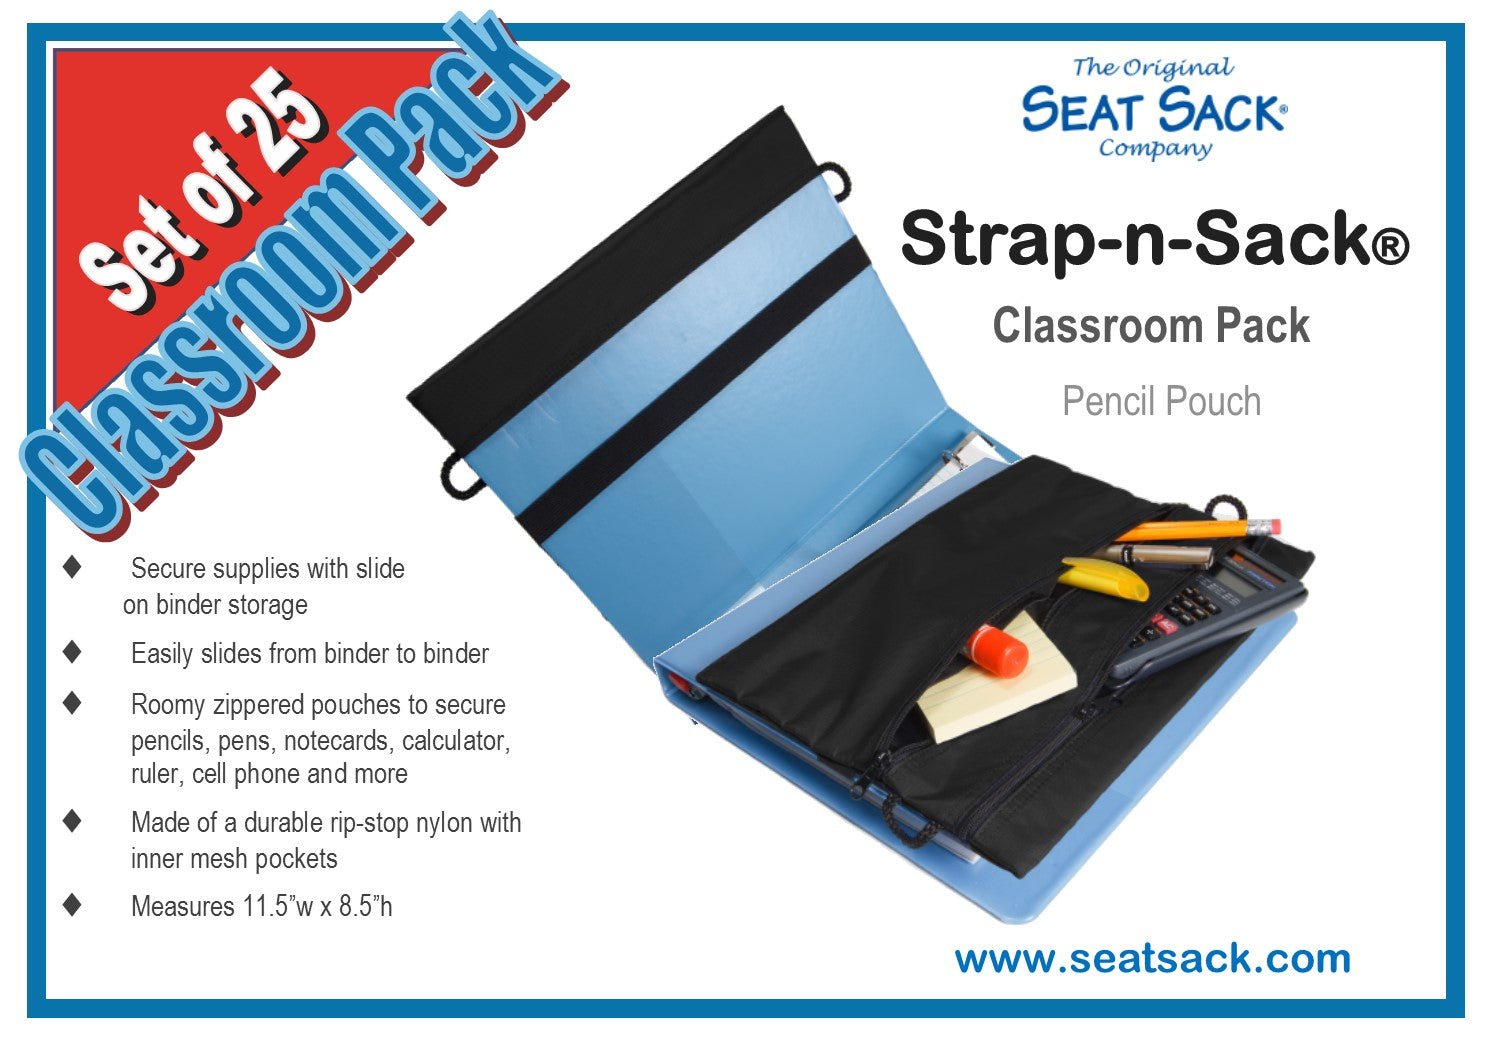 Classroom Pack of 25 Strap-n-Sack multi-zippered pocket pencil pouches that slides onto the front of a binder, strap-n-sack classroom pack